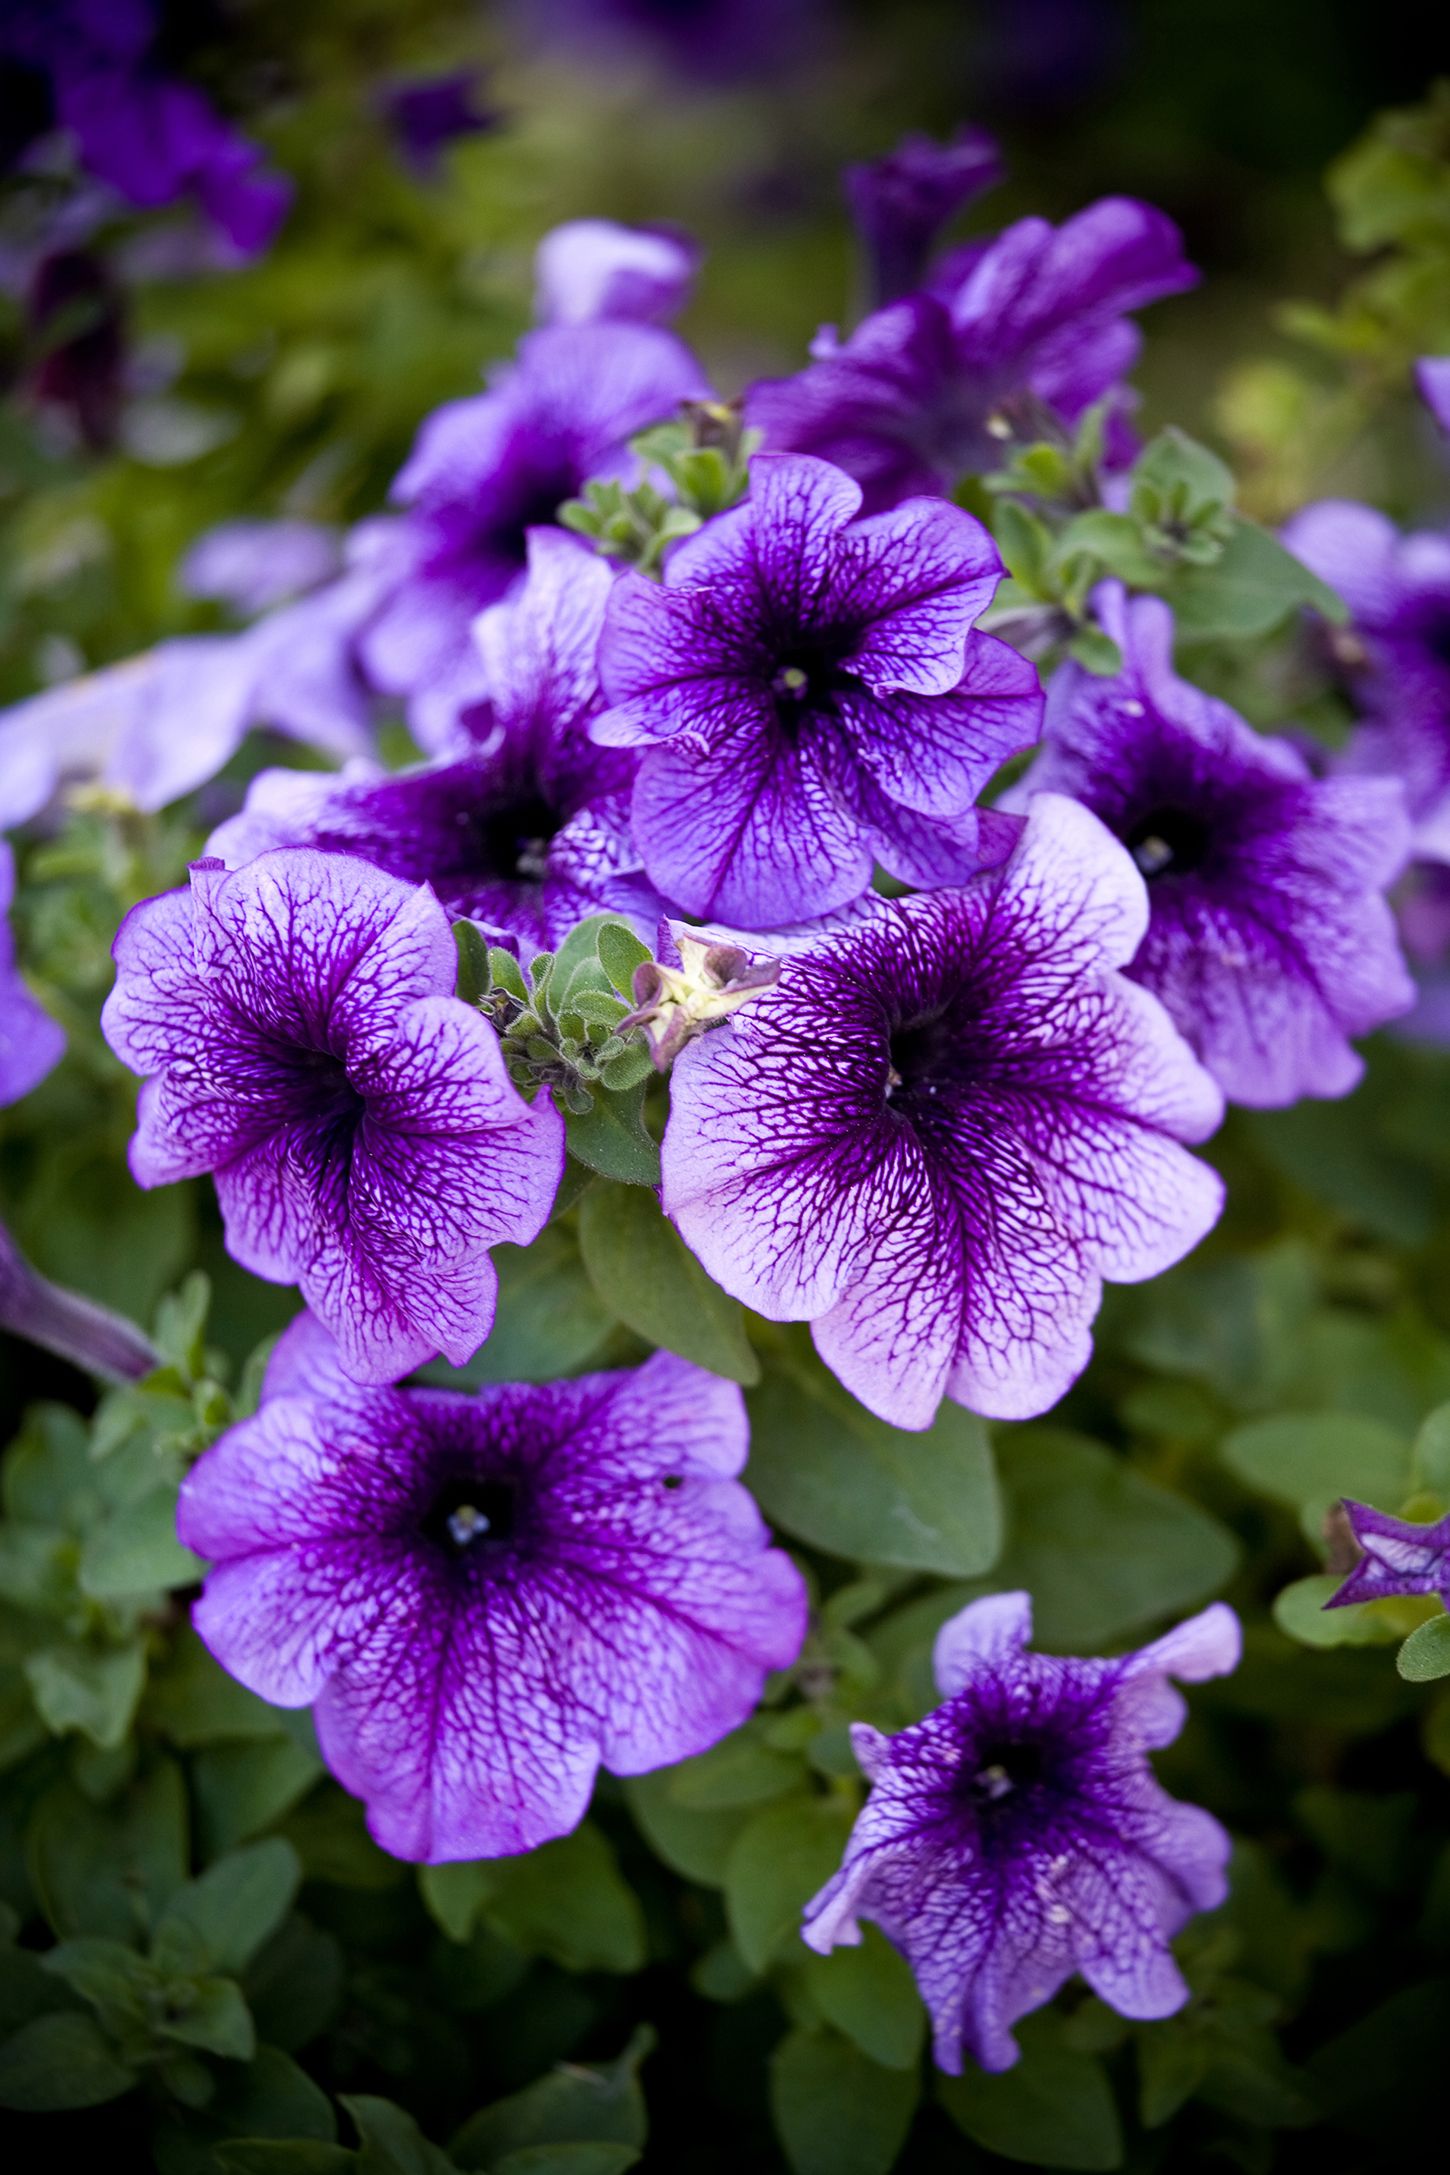 Annual Flowers For Sale Uk : Annual seeds are easy to germinate, come ...